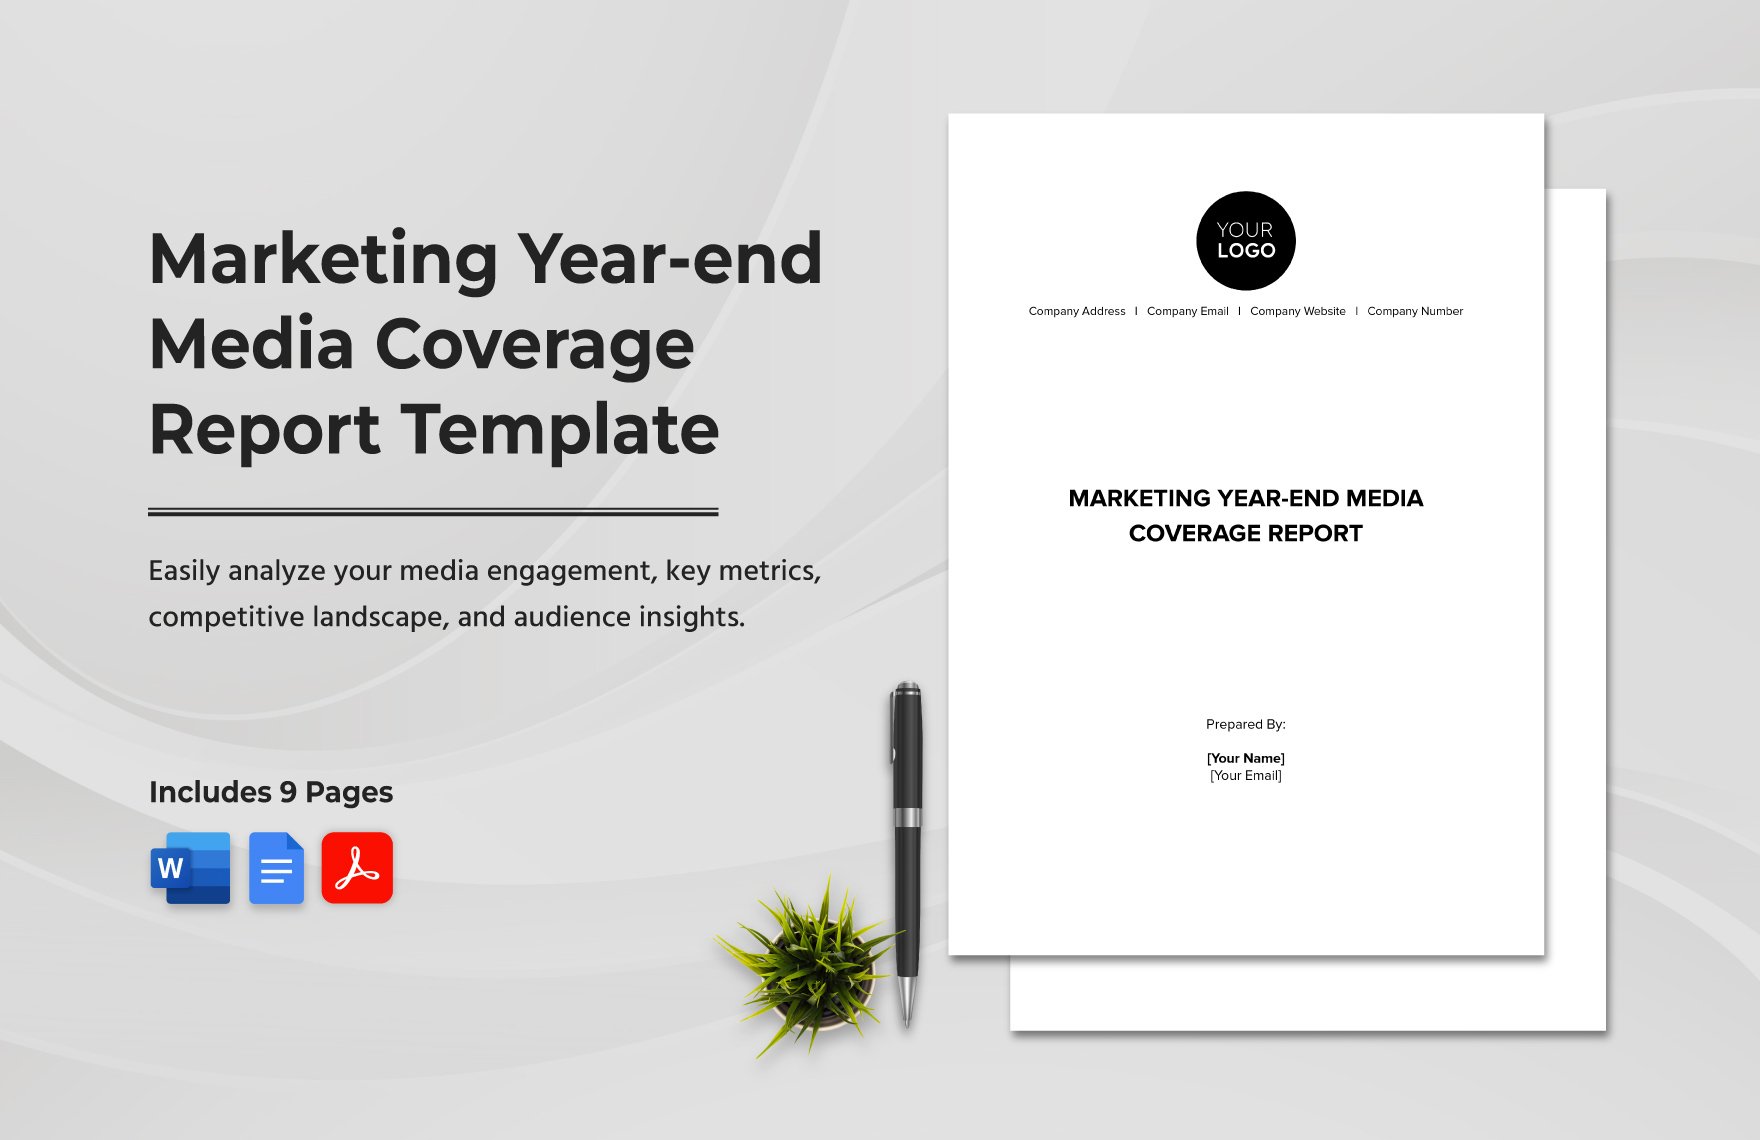 Marketing Year-end Media Coverage Report Template 